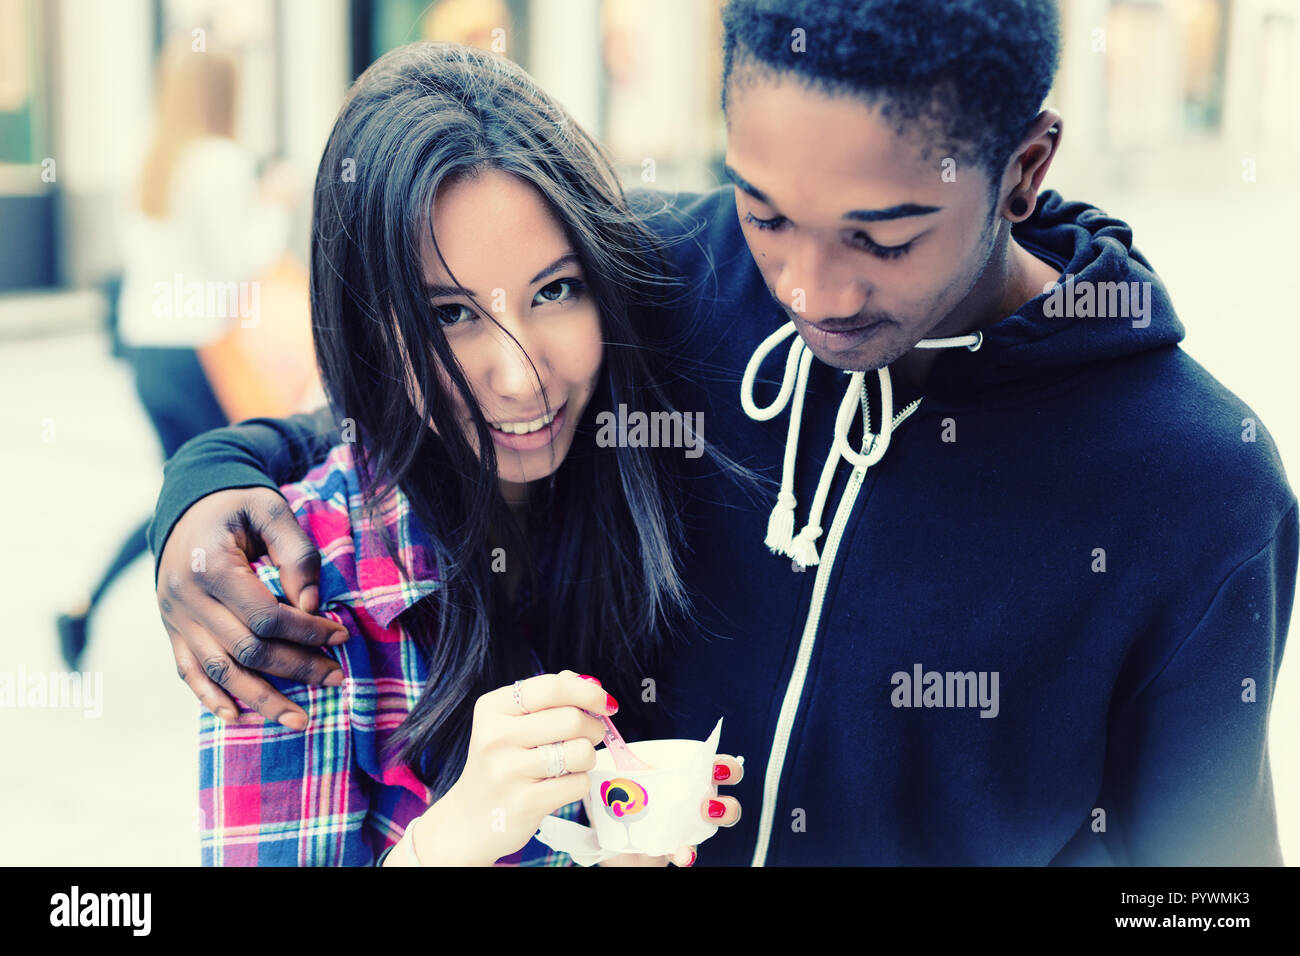 Portrait of young lovable couple Stock Photo